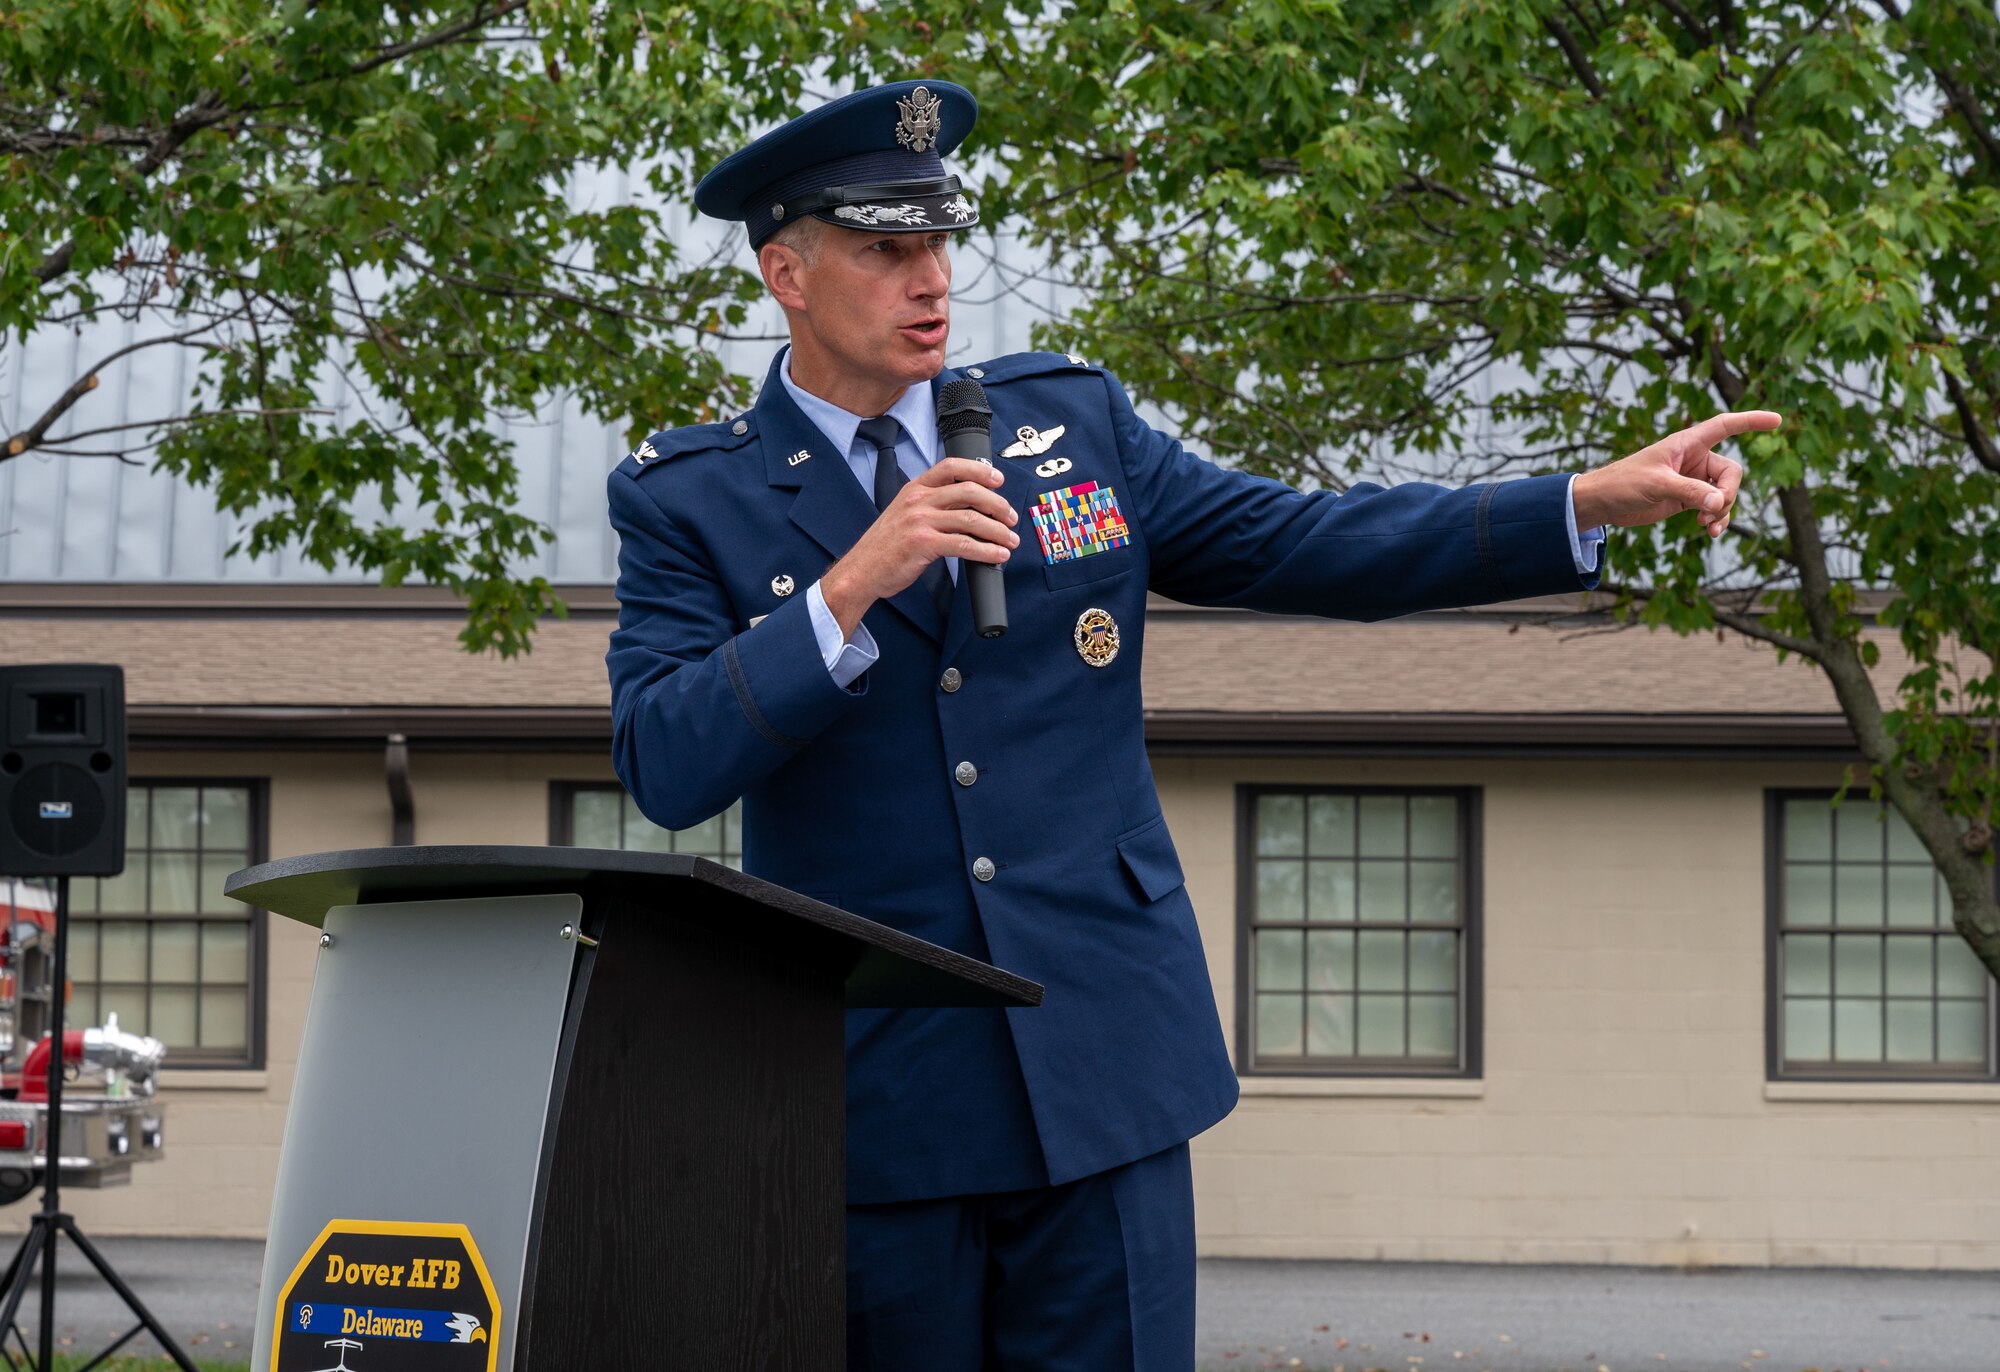 Col. Matt Husemann, 436th Airlift Wing commander, speaks during the 21st Anniversary 9/11 Memorial Ceremony held at the Air Mobility Command Museum on Dover Air Force Base, Delaware, Sept. 11, 2022. The base hosted the ceremony to remember and honor those who perished in the attacks on Sept. 11, 2001. (U.S. Air Force photo by Senior Airman Cydney Lee